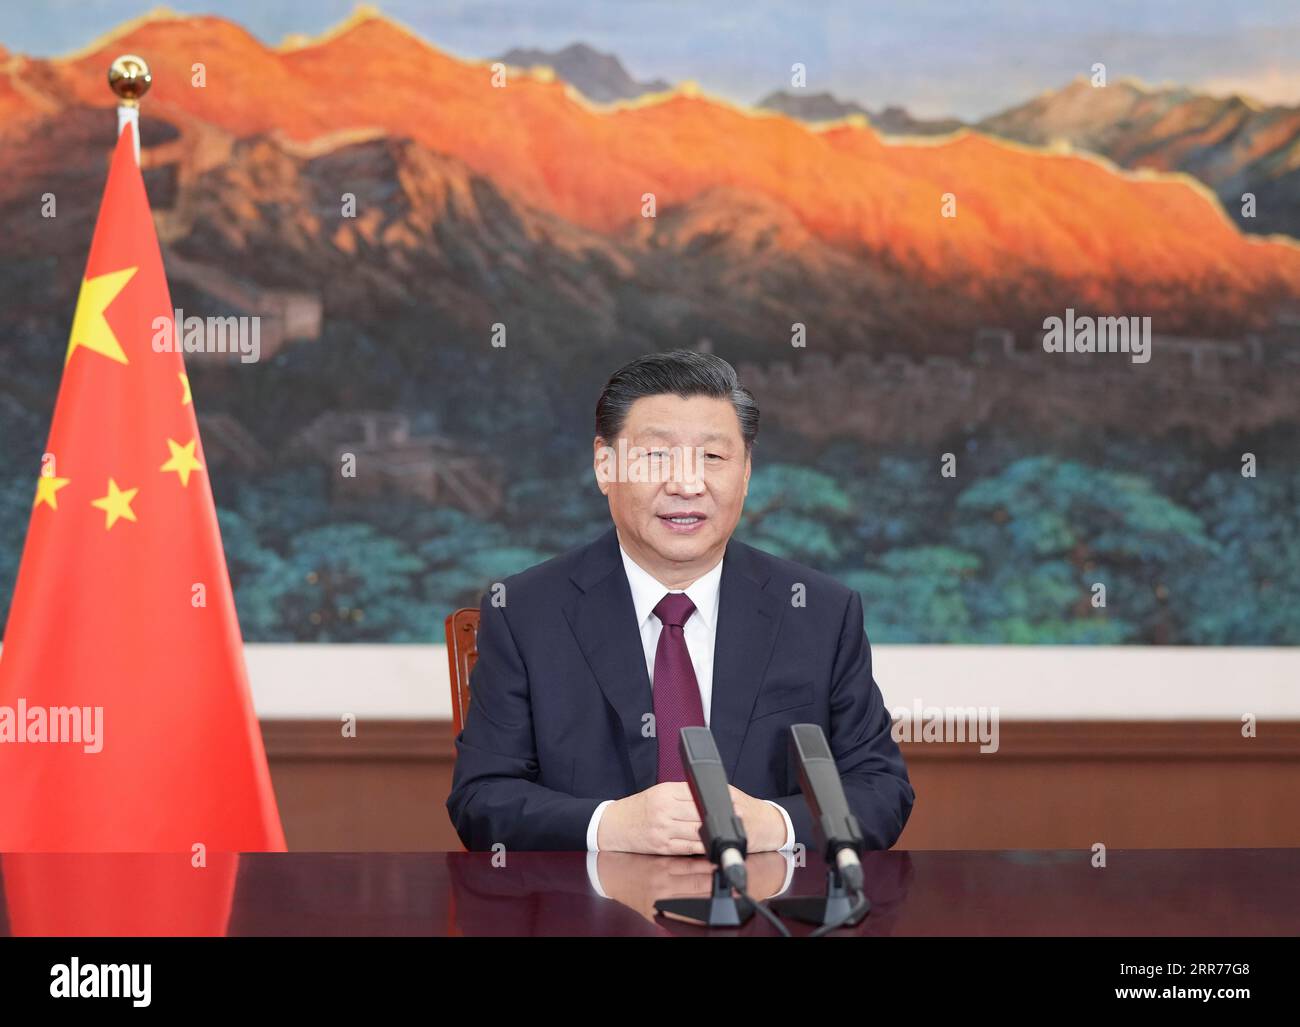 210317 -- BEIJING, March 17, 2021 -- Chinese President Xi Jinping sends a video message to an event held by Bangladesh in commemoration of the centenary of its founding father Sheikh Mujibur Rahman s birth, also in celebration of the 50th anniversary of the country s independence on March 17, 2021. On behalf of the Chinese government and Chinese people, Xi extended sincere greetings and best wishes to Bangladeshi President Abdul Hamid, Bangladeshi Prime Minister Sheikh Hasina, and the Bangladeshi government and people.  CHINA-XI JINPING-BANGLADESH-VIDEO MESSAGE CN LixXueren PUBLICATIONxNOTxINx Stock Photo